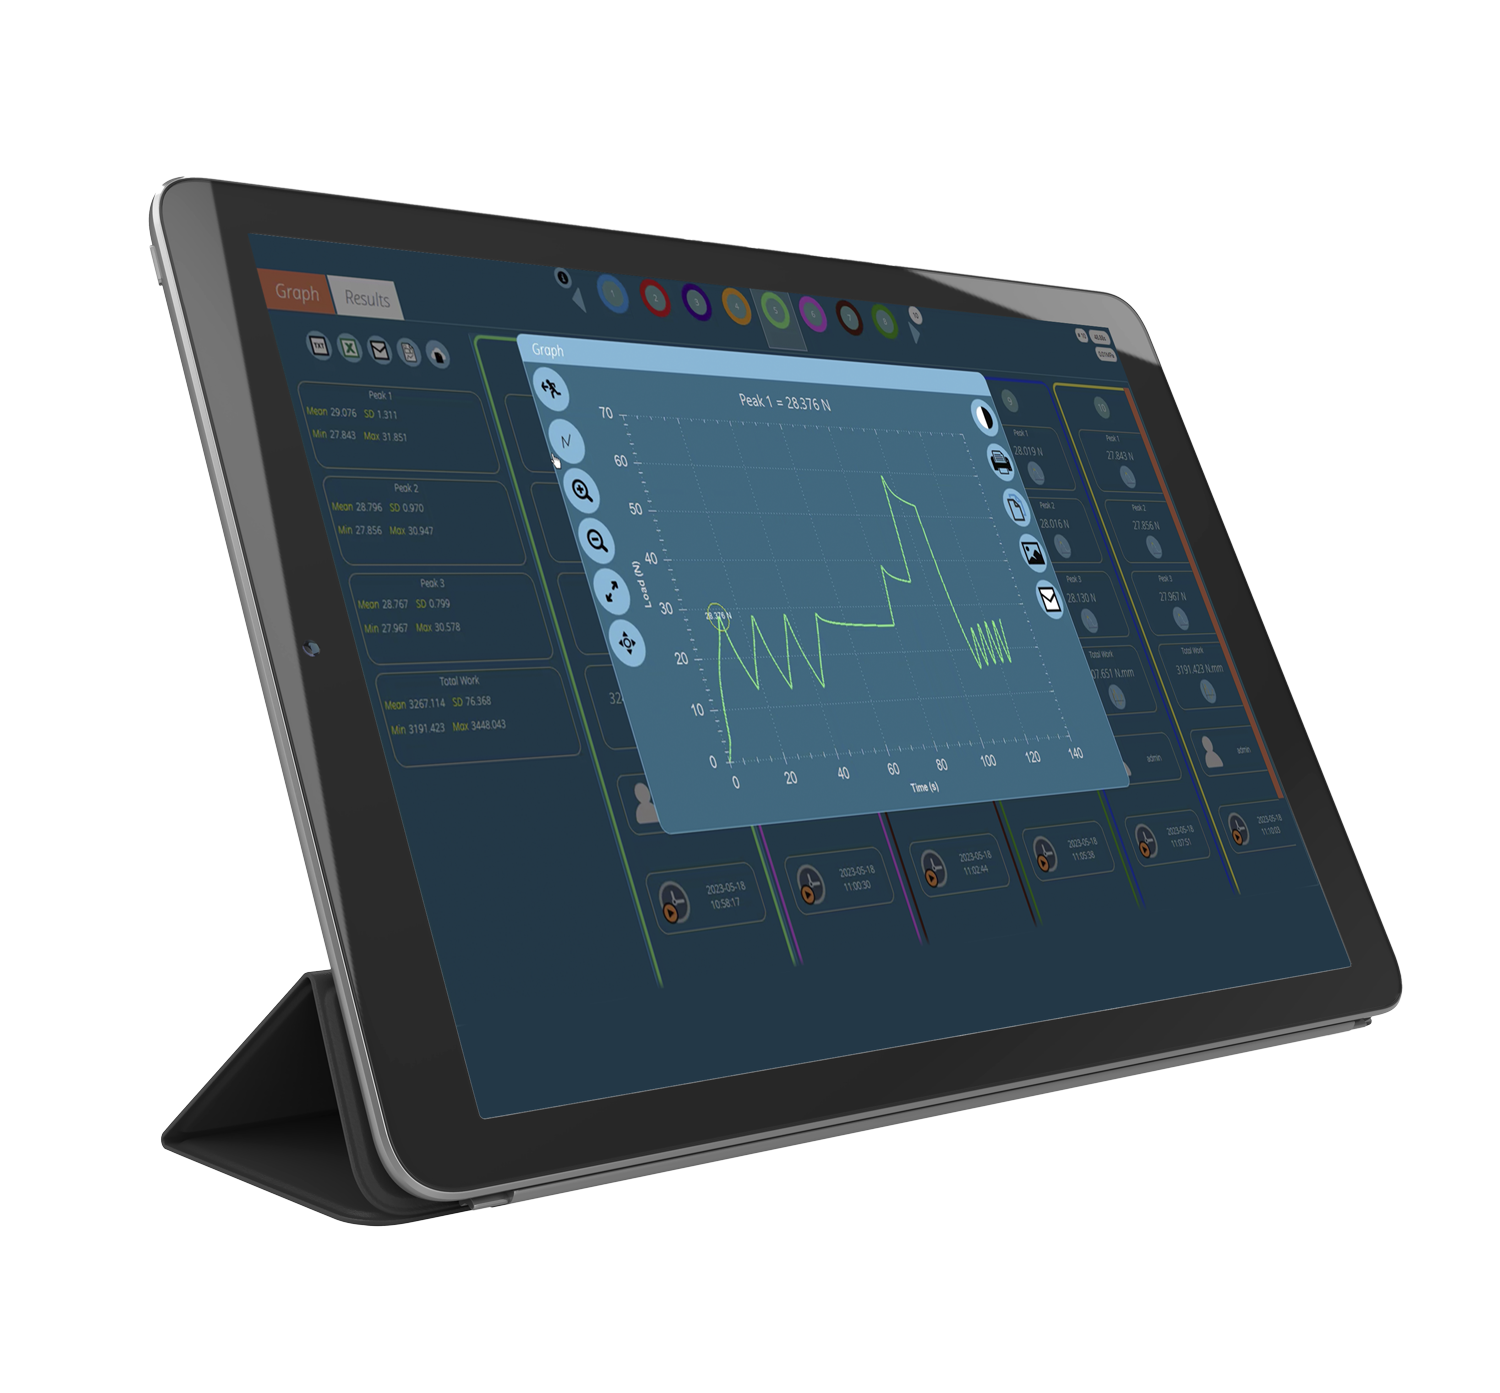 VectorPro force testing software test screen loaded on a touchscreen tablet